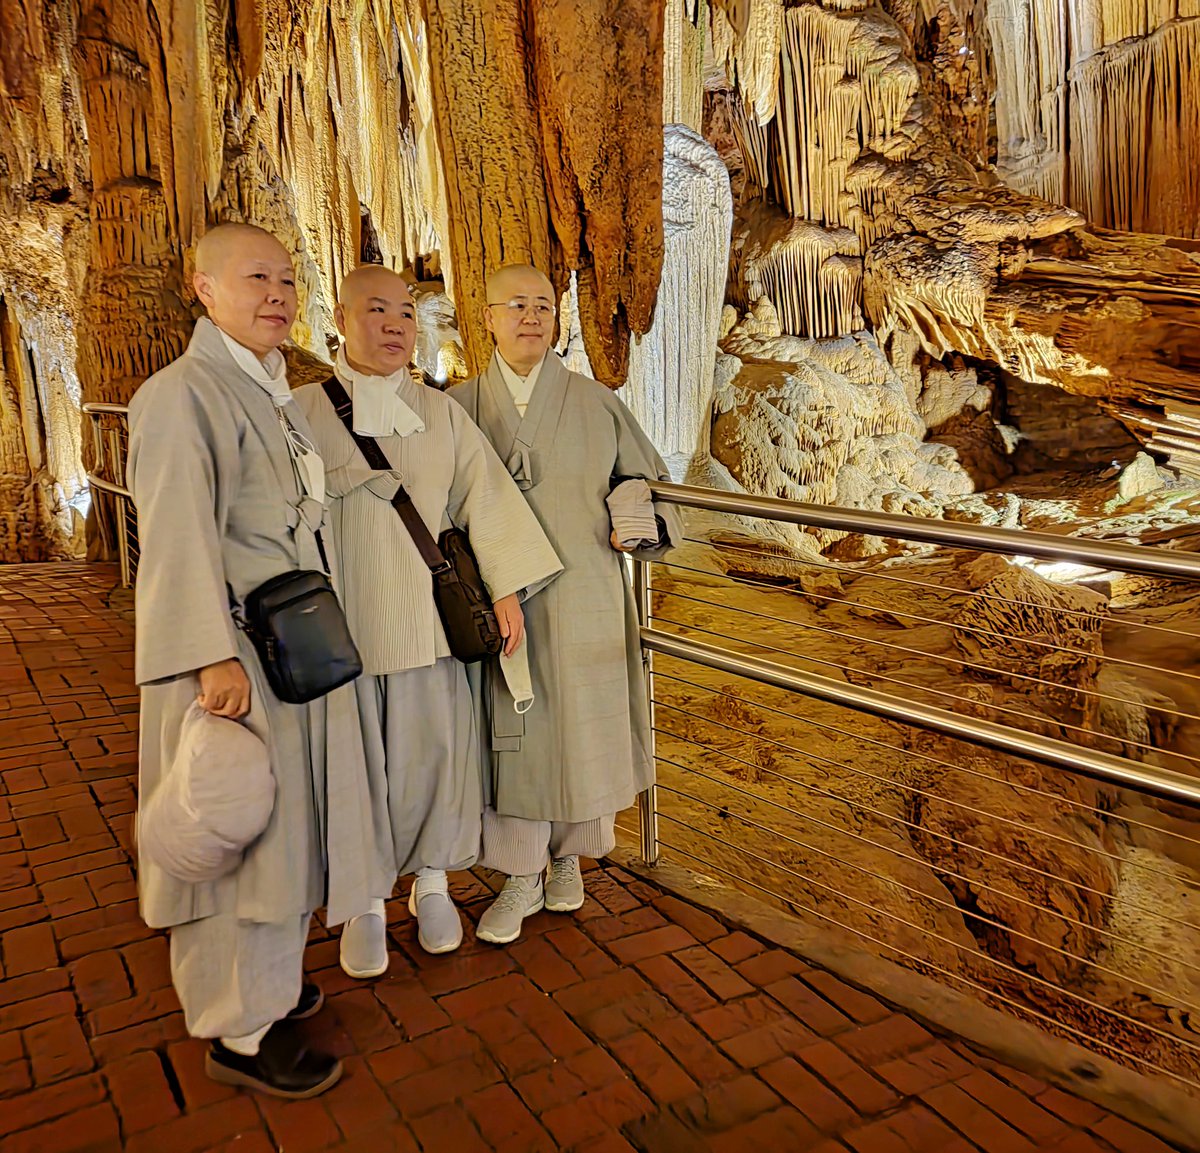 The Luray #caverns. 4 quick #photos by cellphone, including of  some visiting #Budhists. Click on each photo for full view.

#vacation #travelphotography
#nature #rock #rockformations 
#Virginia #minerals